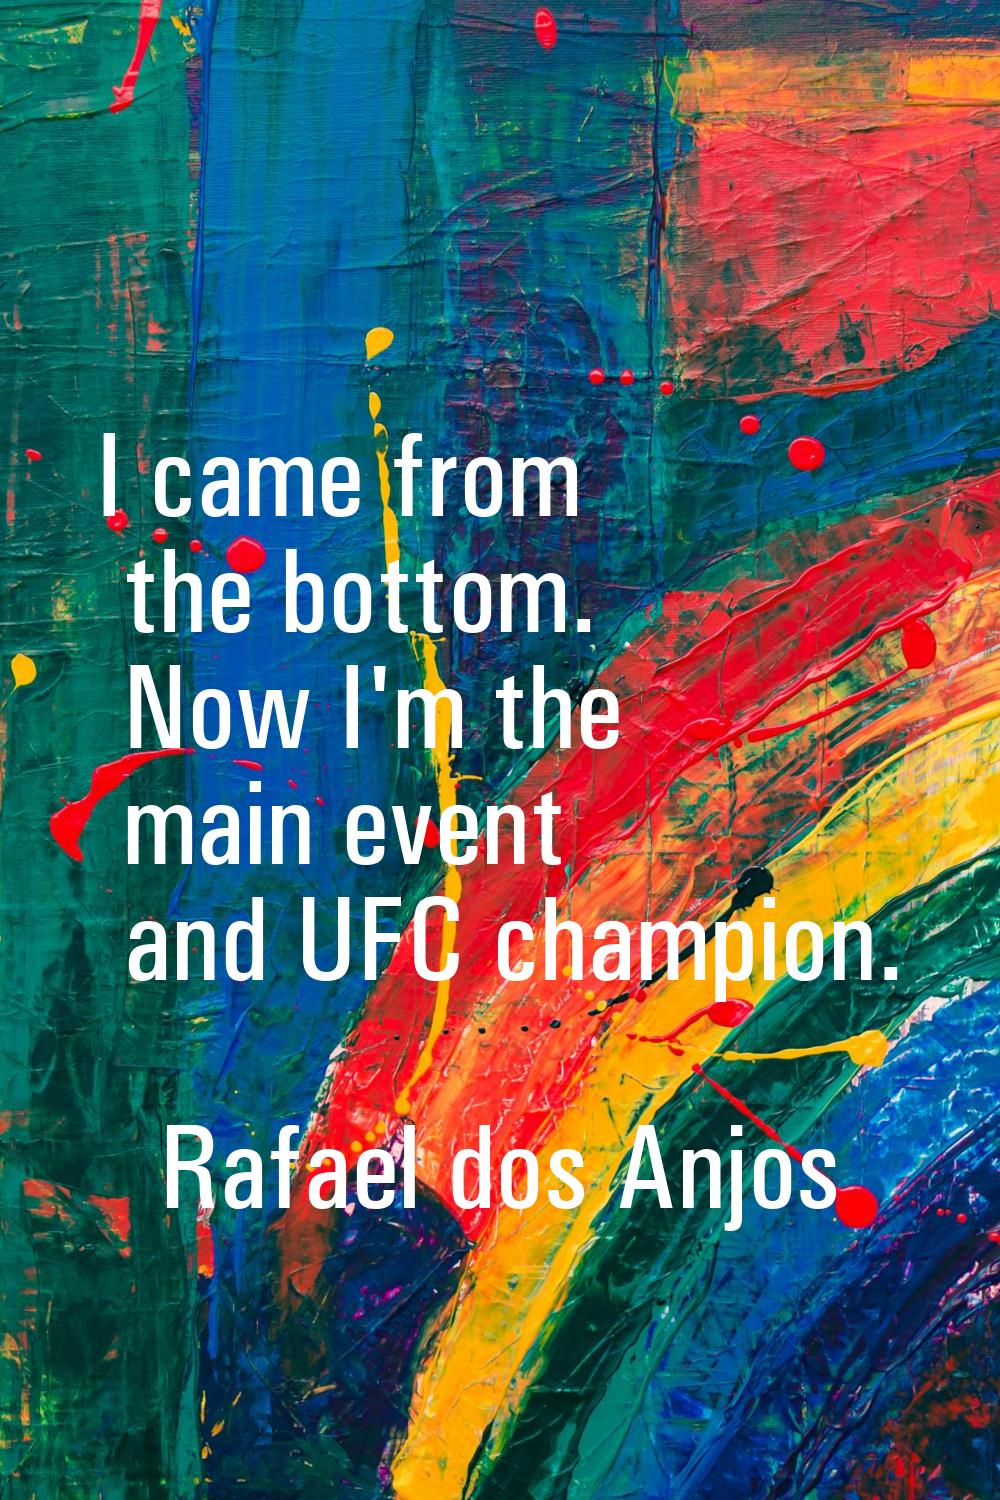 I came from the bottom. Now I'm the main event and UFC champion.